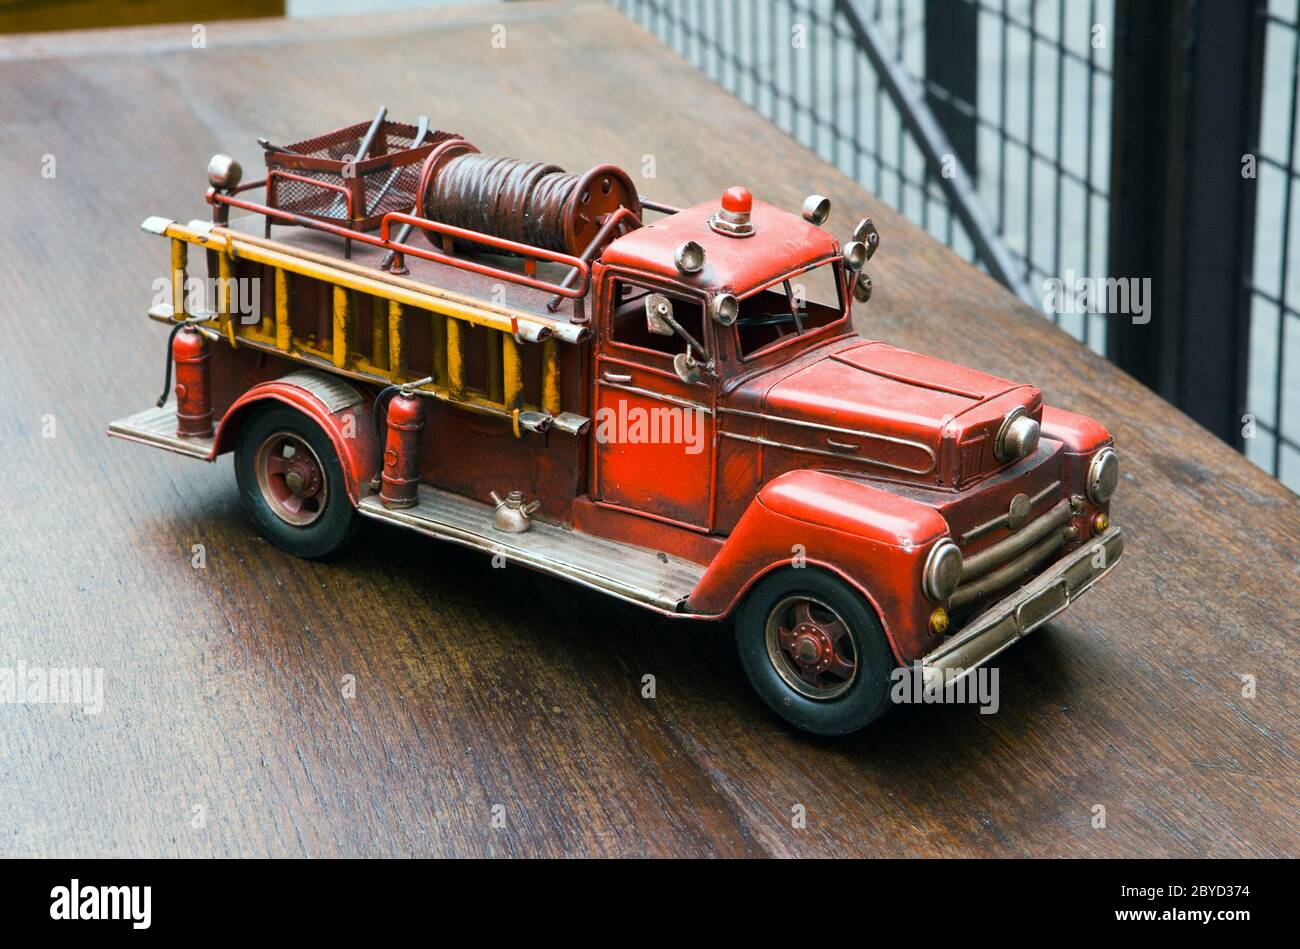 Old toy- Fire Engine Stock Photo